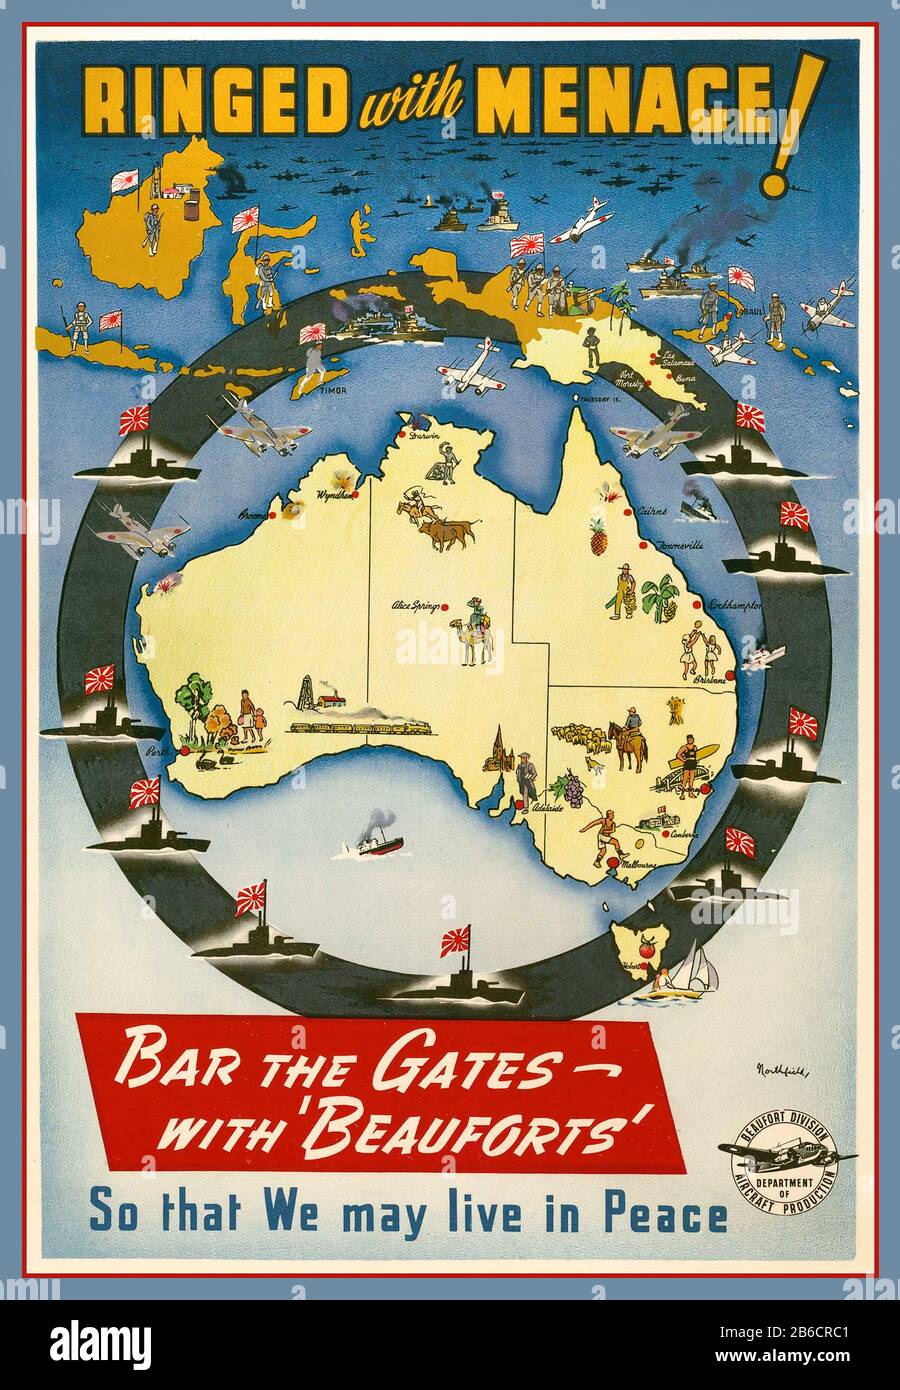 Australia Vintage WW2 Propaganda Poster 1942 wartime poster depicts Australia ringed by the threat of Japan and invasion. 'RINGED WITH MENACE'  'Bar The Gates with Beauforts So That We May Live in Peace'  World War II Second World War Stock Photo